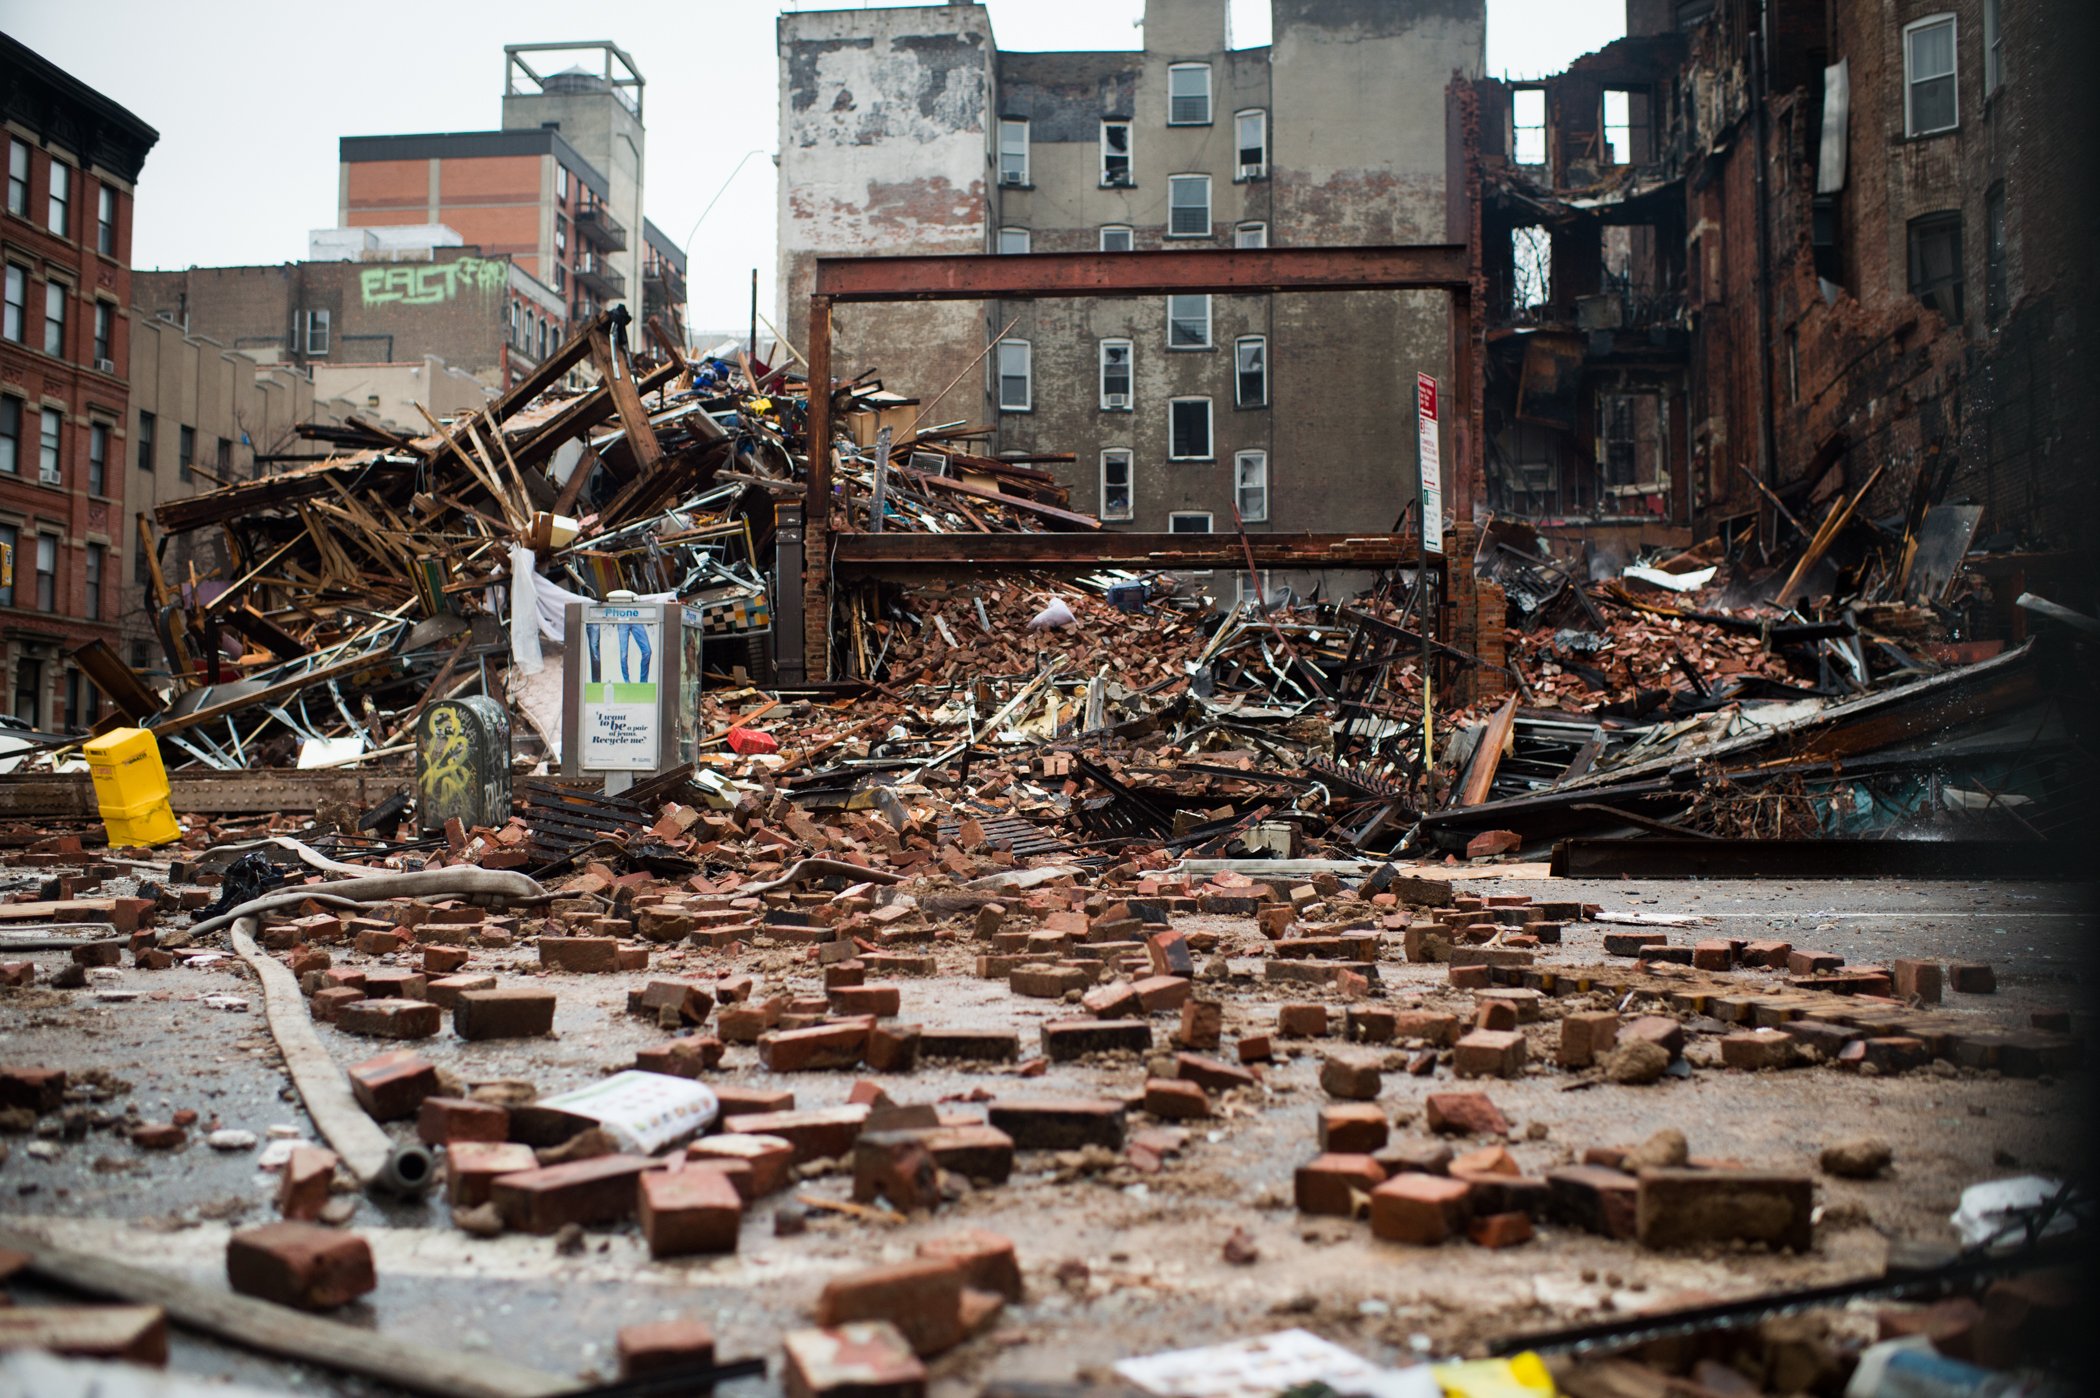 A debris-strewn street seen amid the site of a seven-alarm fire that caused the collapse of two buildings and damage to two other buildings a day after the blaze took place on March 27, 2015 in New York City.